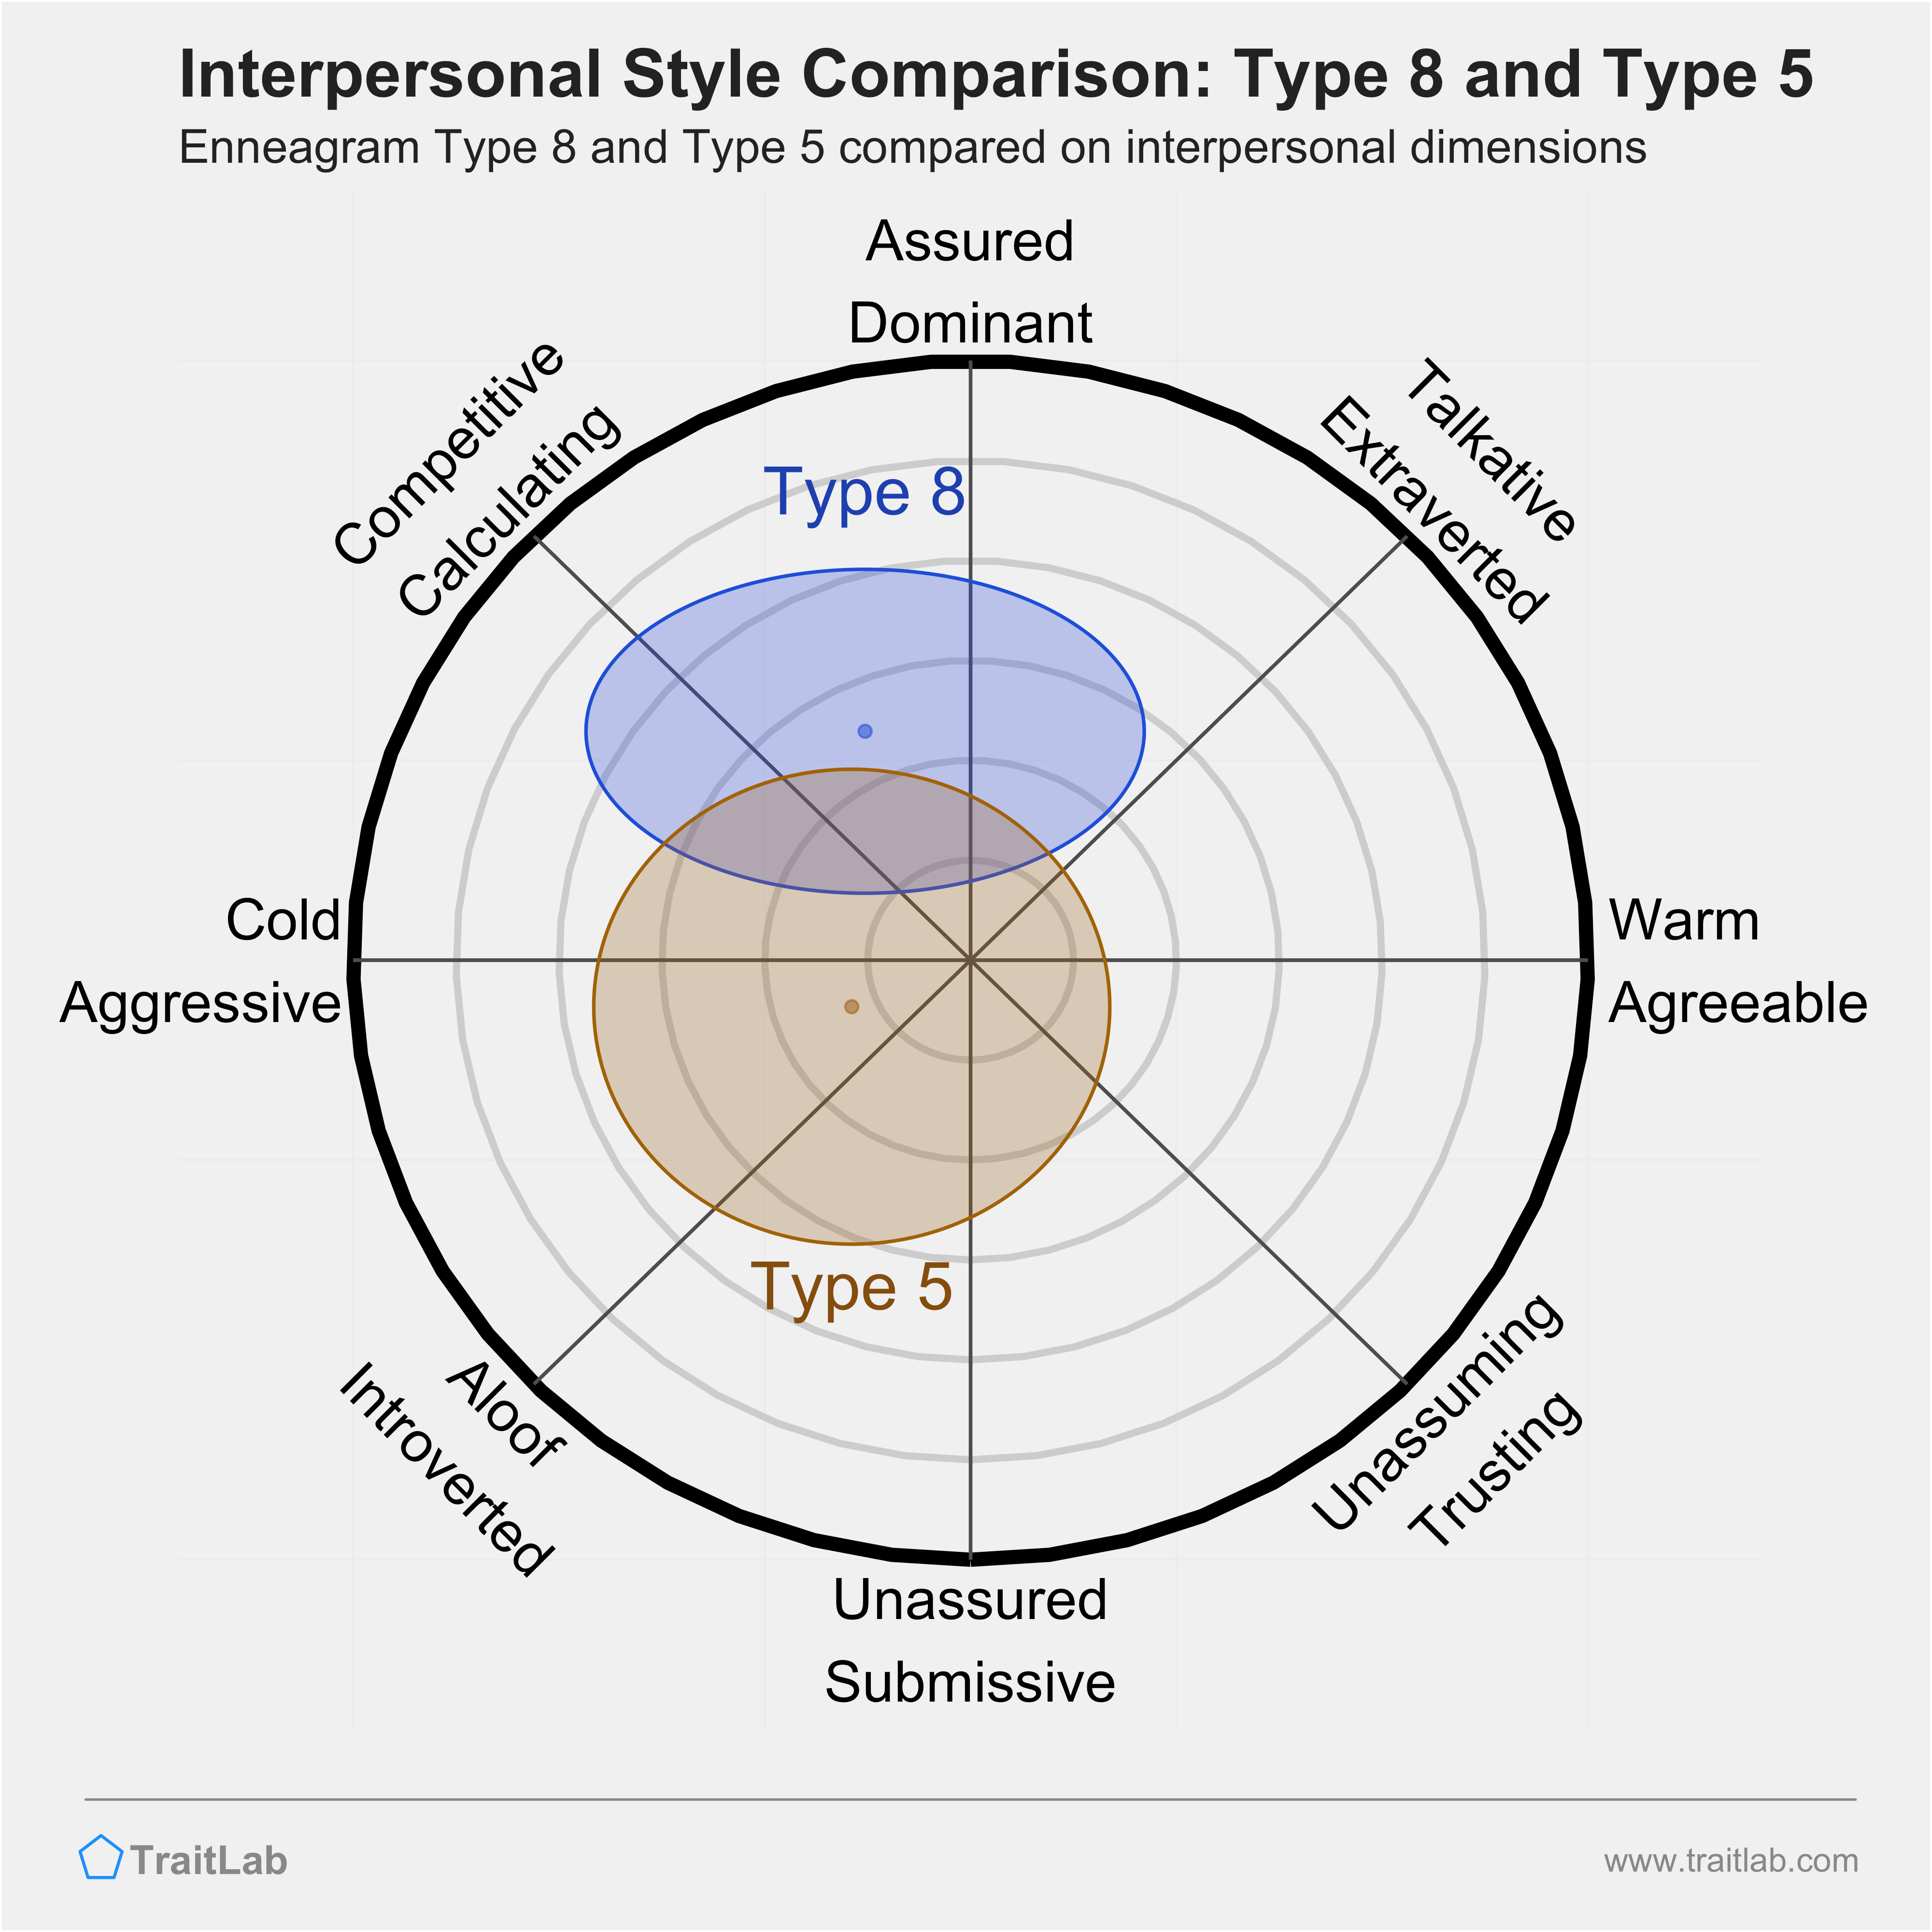 Enneagram Type 8 and Type 5 comparison across interpersonal dimensions